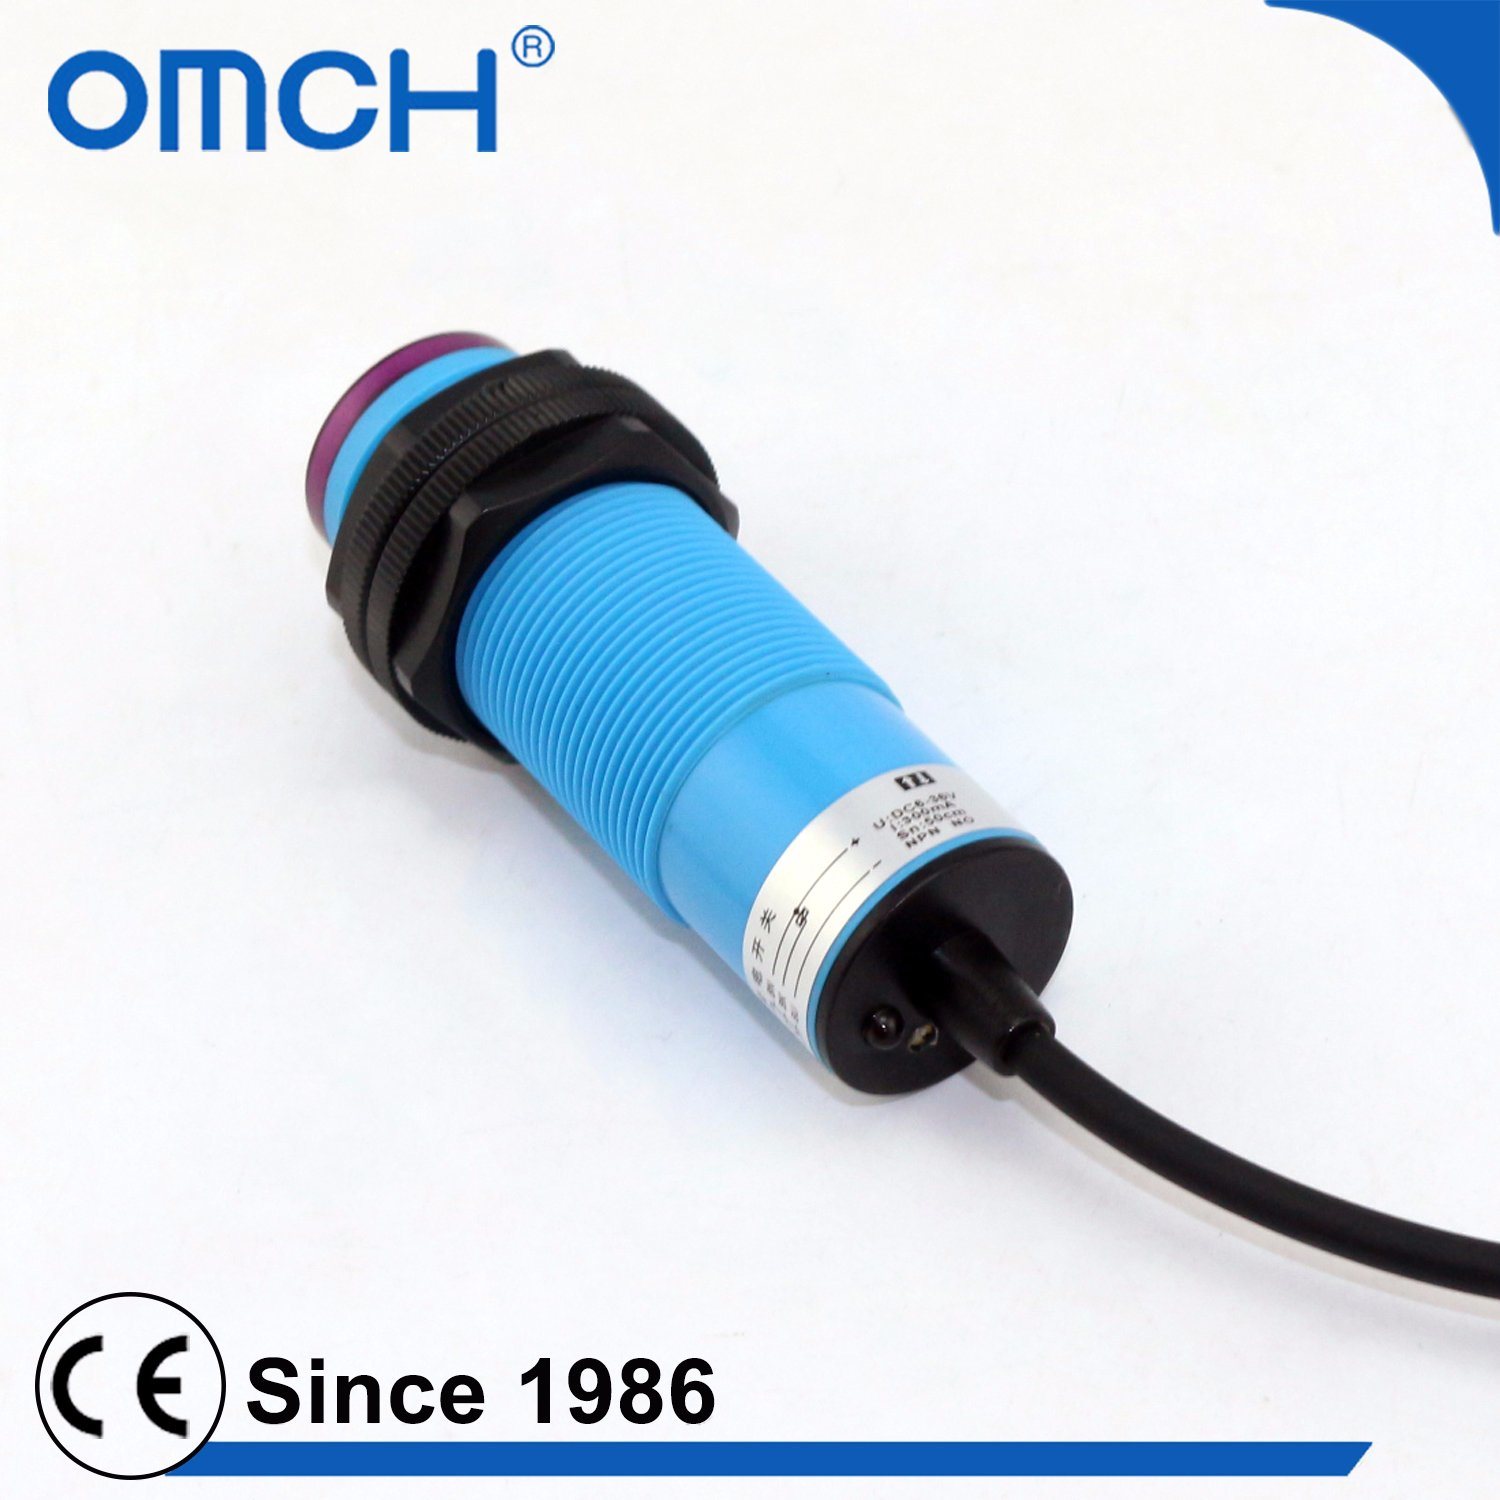 Omch E3f M18 Diffuse Reflection / Reflective / Through Beam Photoelectric Sensor Switch